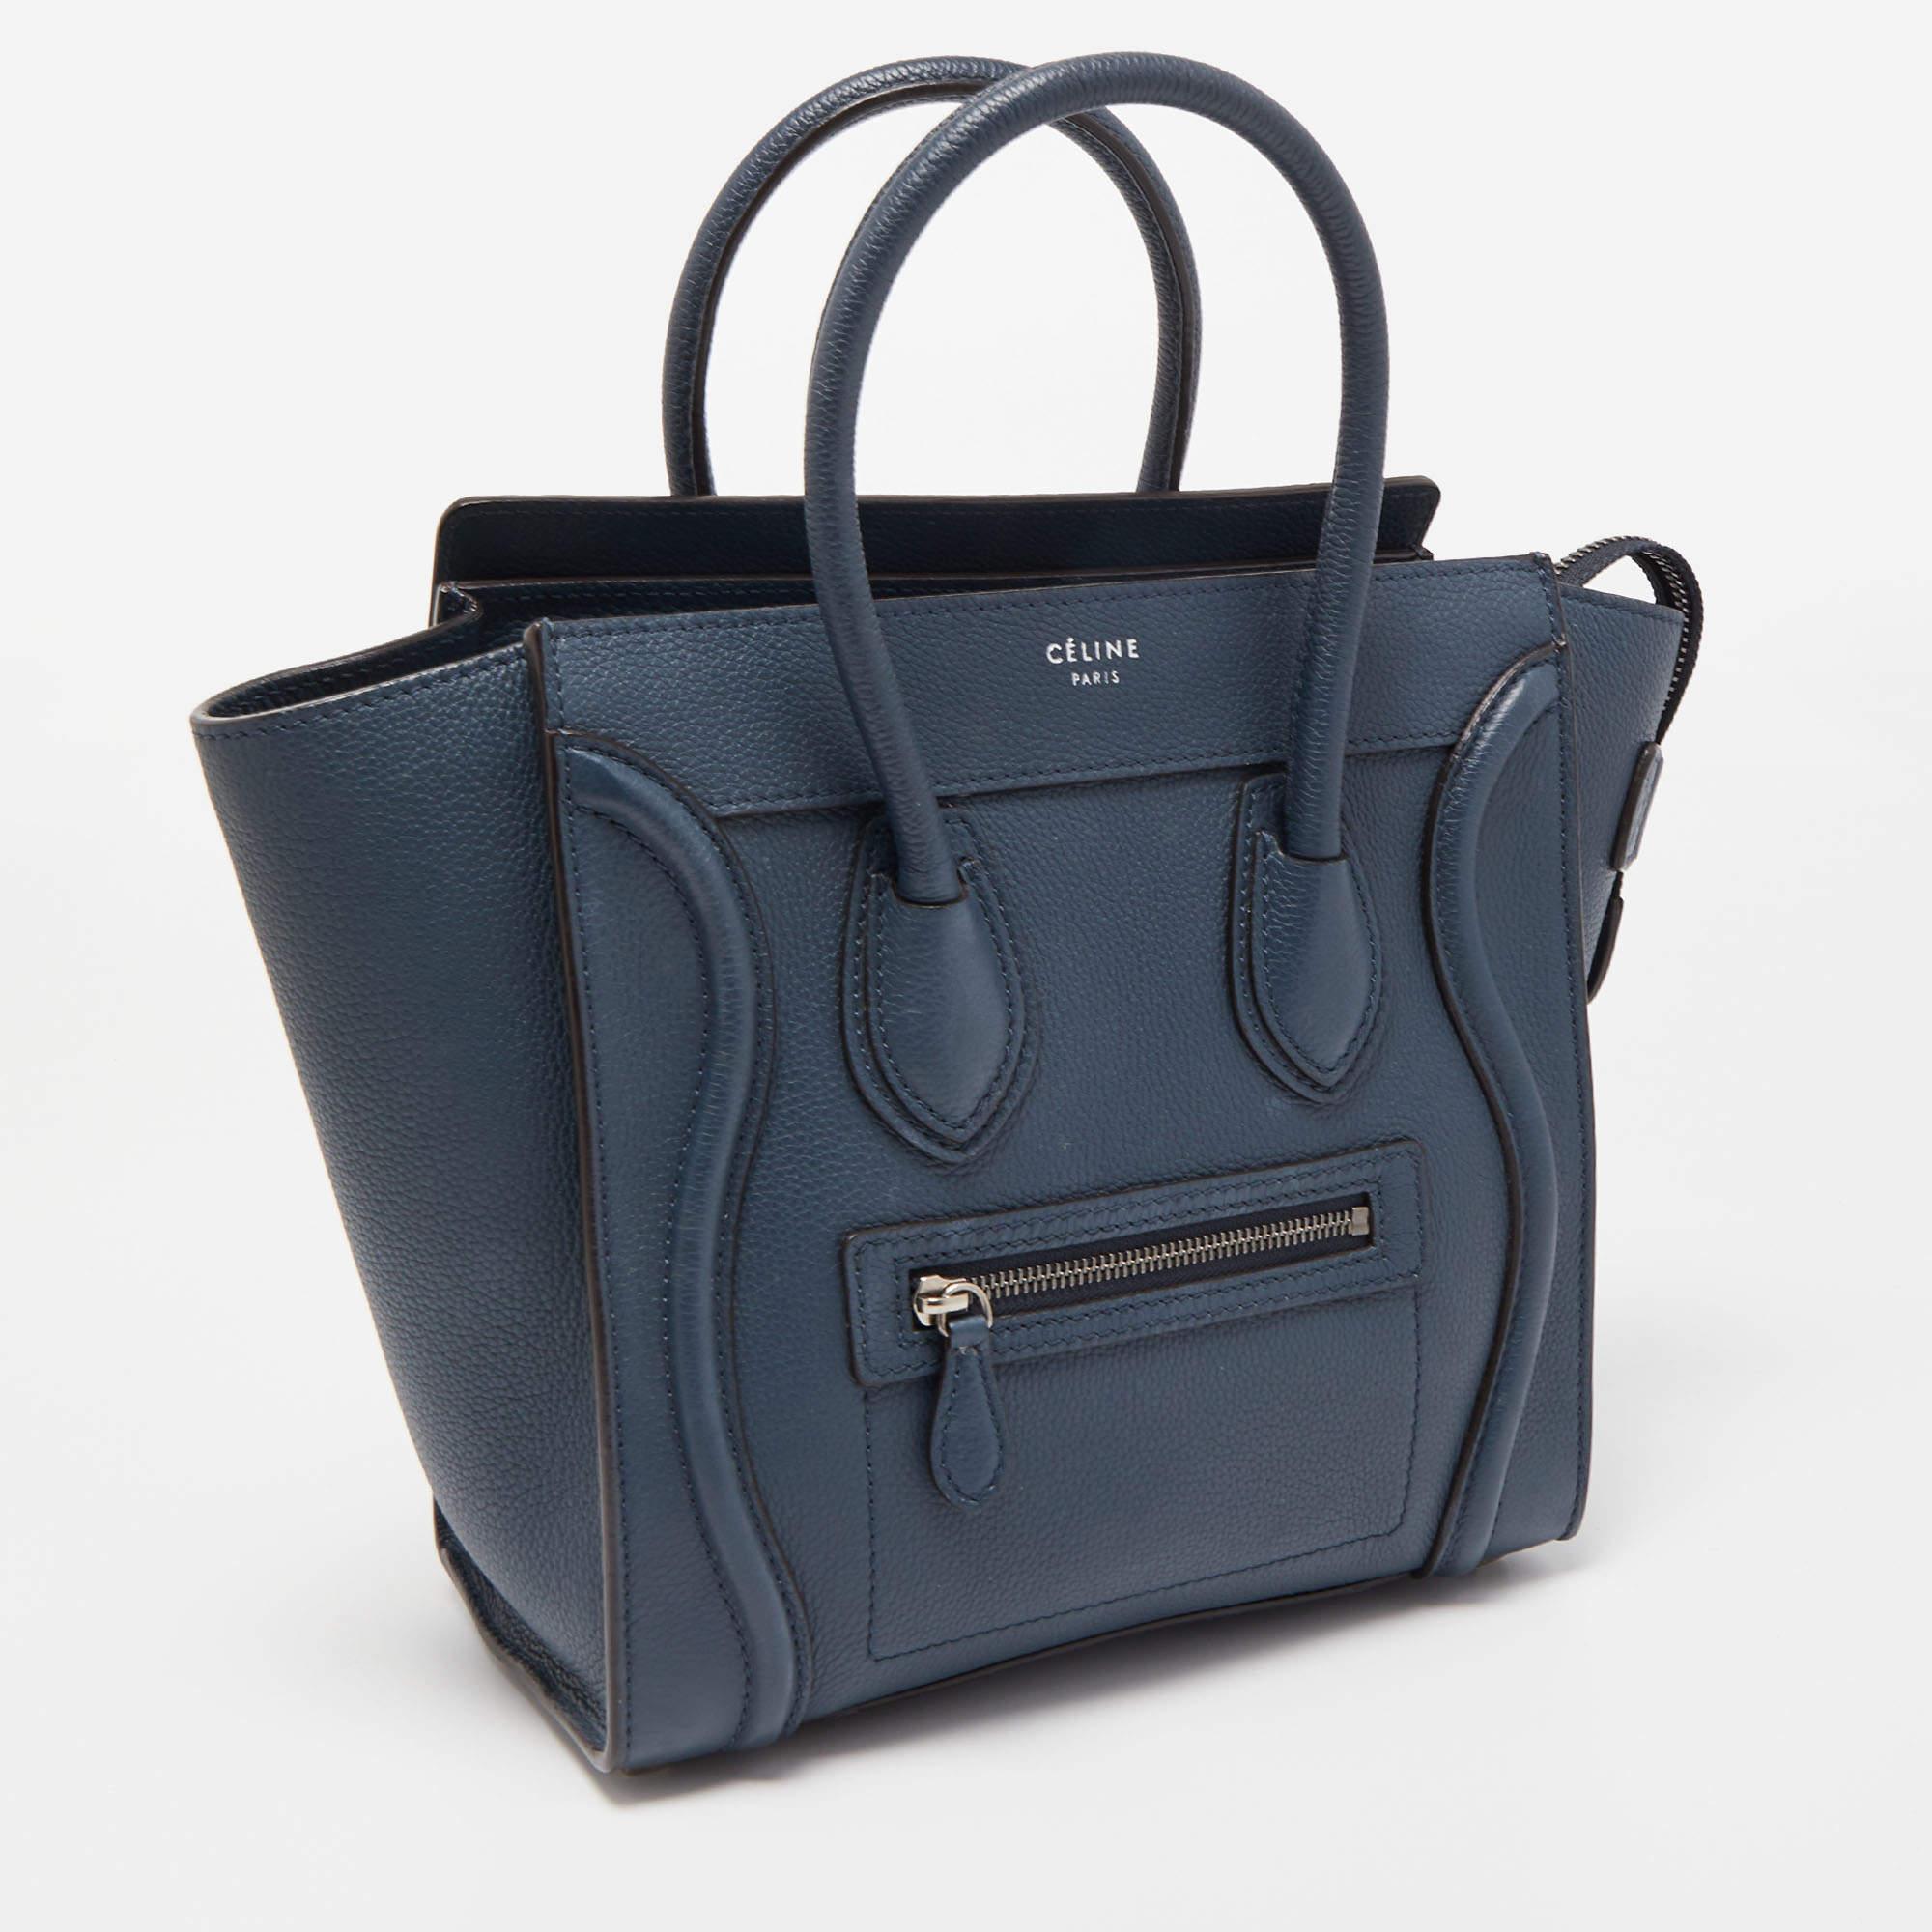 The Luggage tote from Celine is one of the most popular handbags in the world. This tote is crafted from leather and designed in a teal blue hue. It comes with rolled top handles and a front zip pocket. The bag is equipped with a well-sized leather